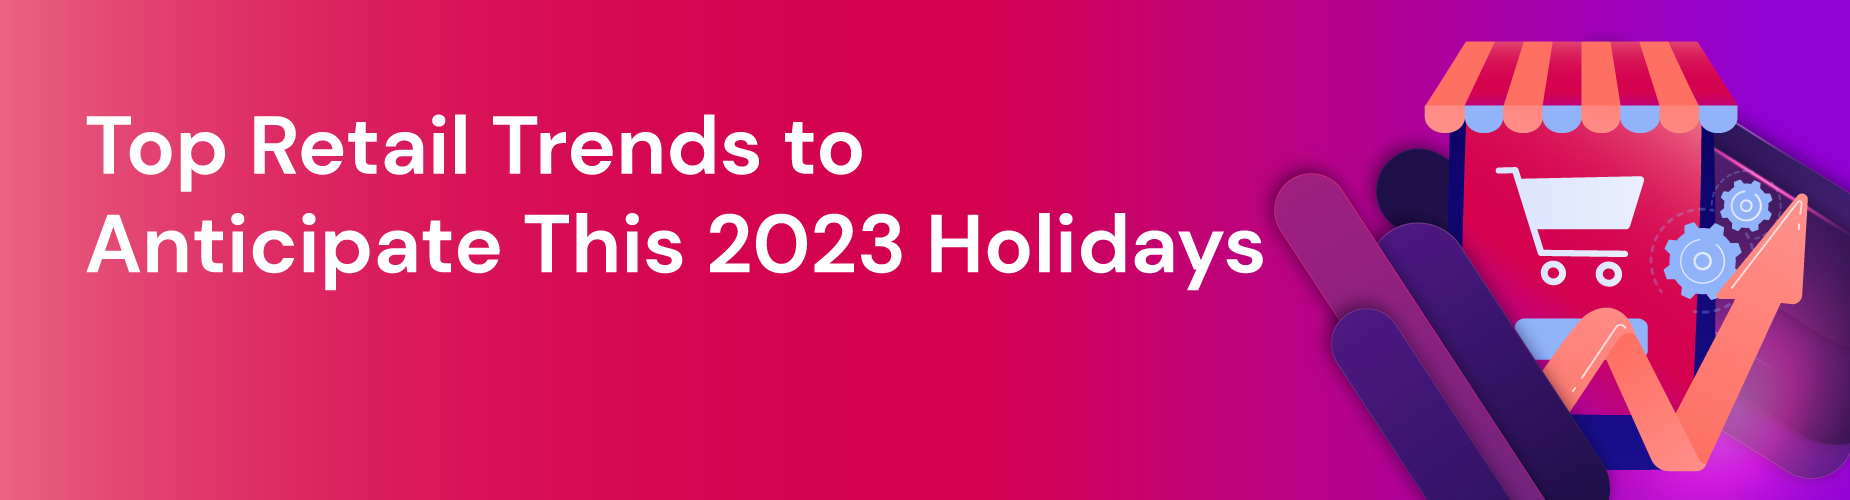 Top Retail Trends to Anticipate This 2023 Holidays